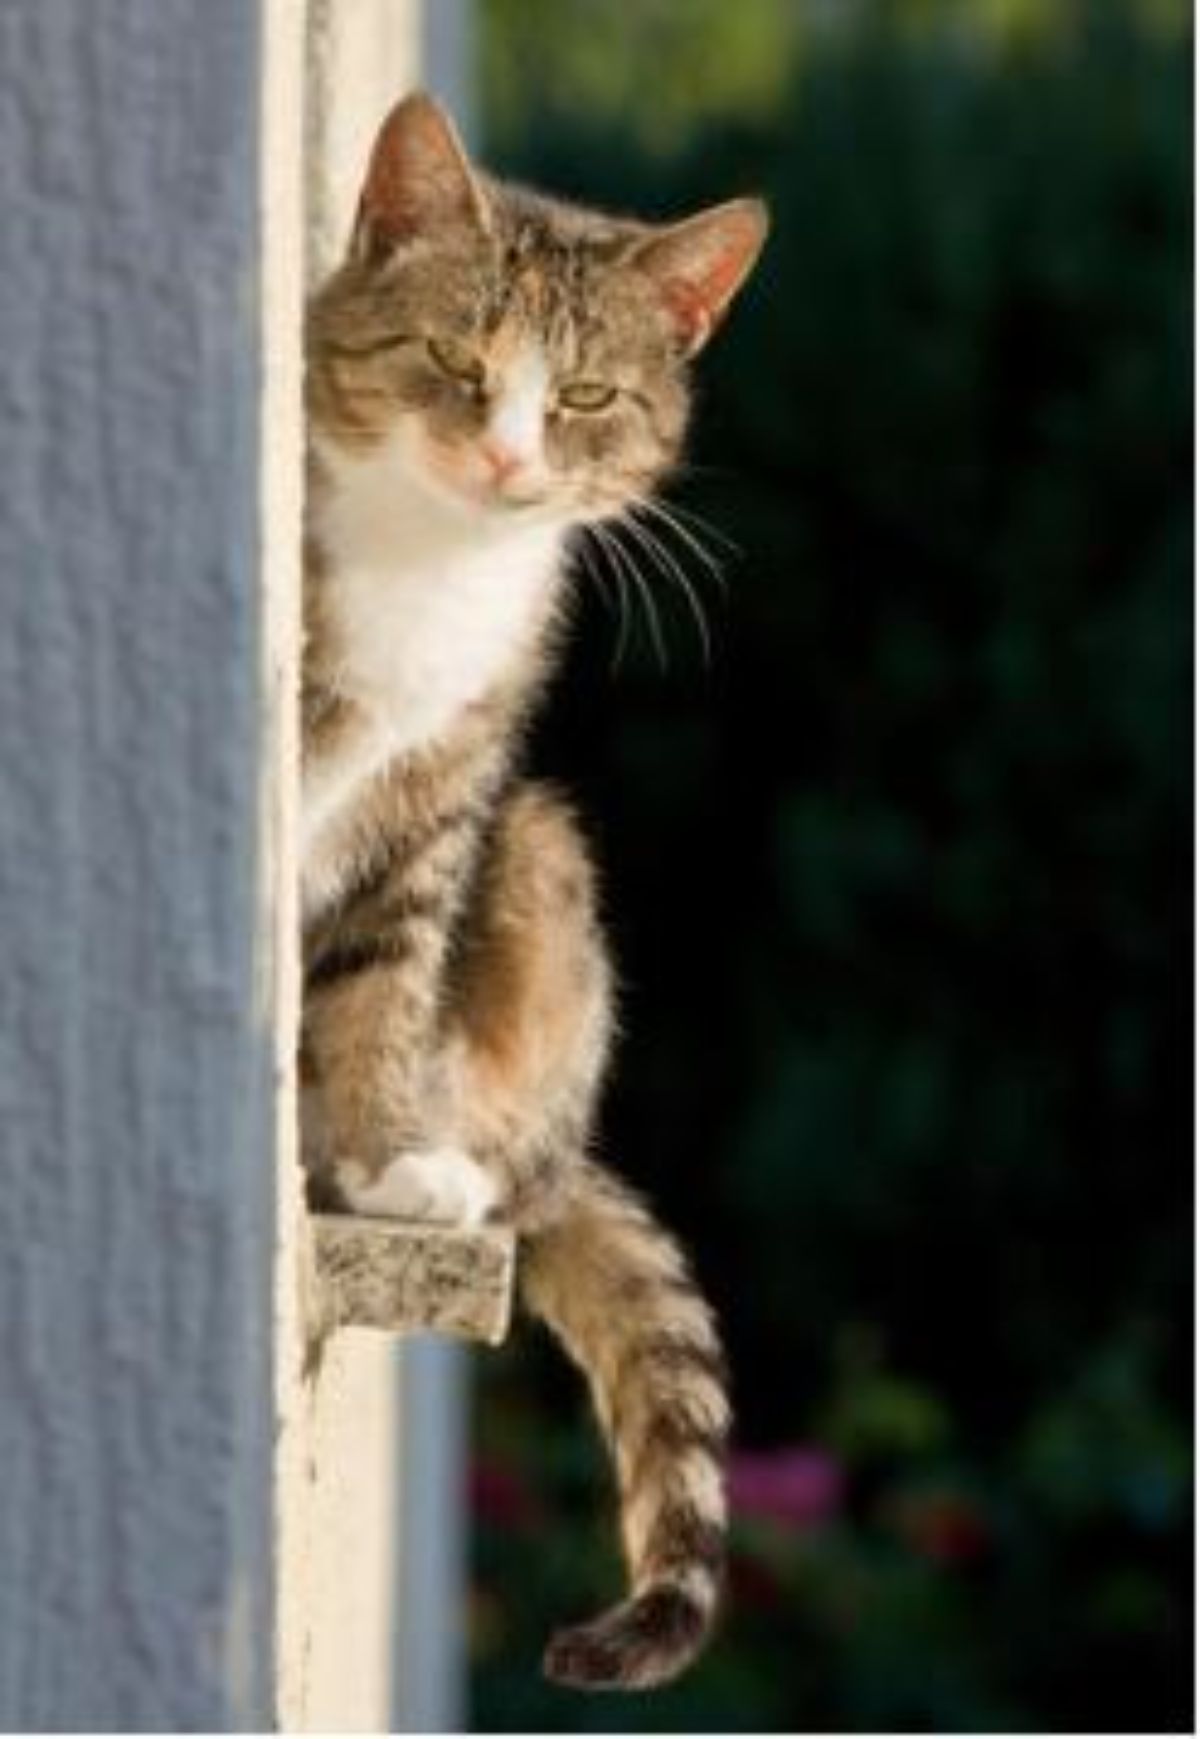 brown and white tabby cat sitting on a ledge and leaning over